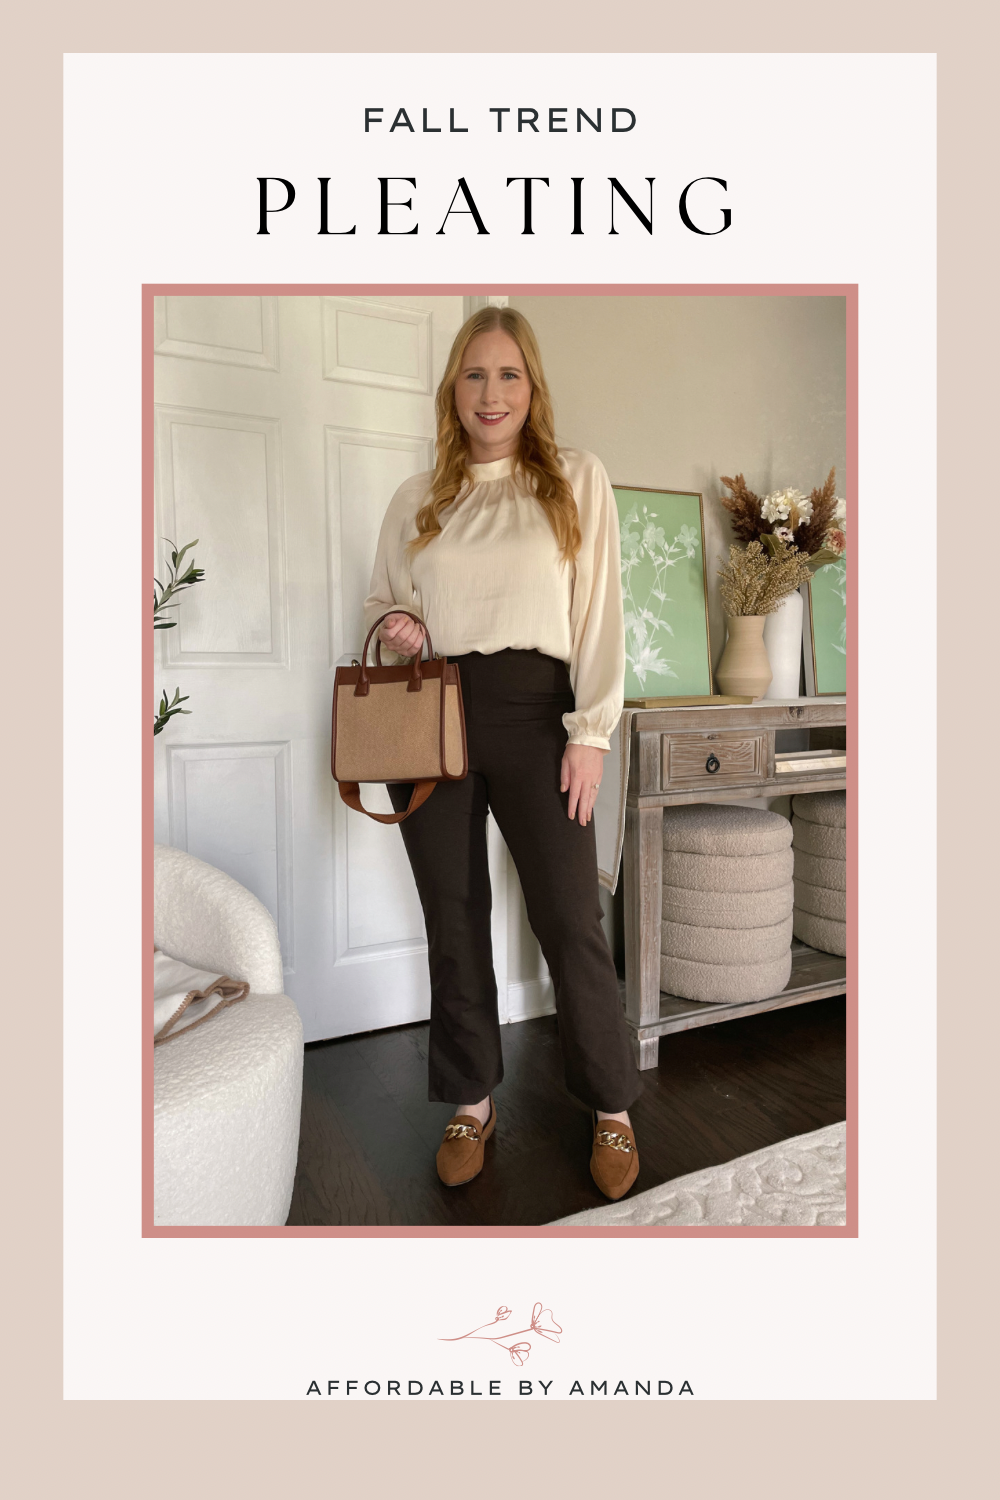 Satin Blouse, brown ponte pants, brown chain loafers fall outfit idea